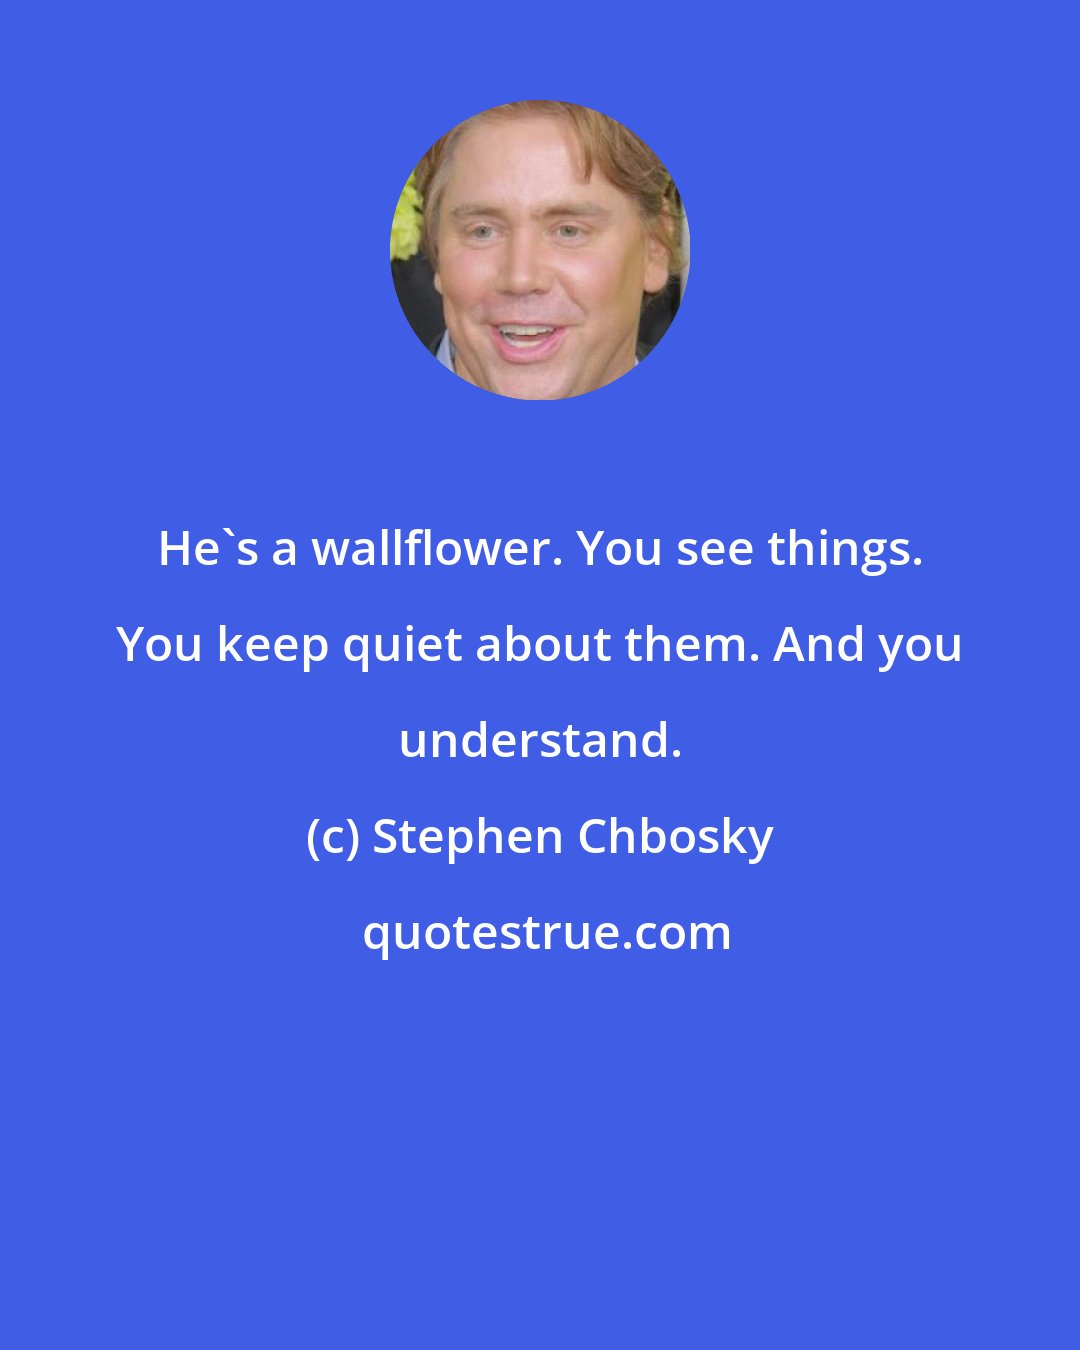 Stephen Chbosky: He's a wallflower. You see things. You keep quiet about them. And you understand.